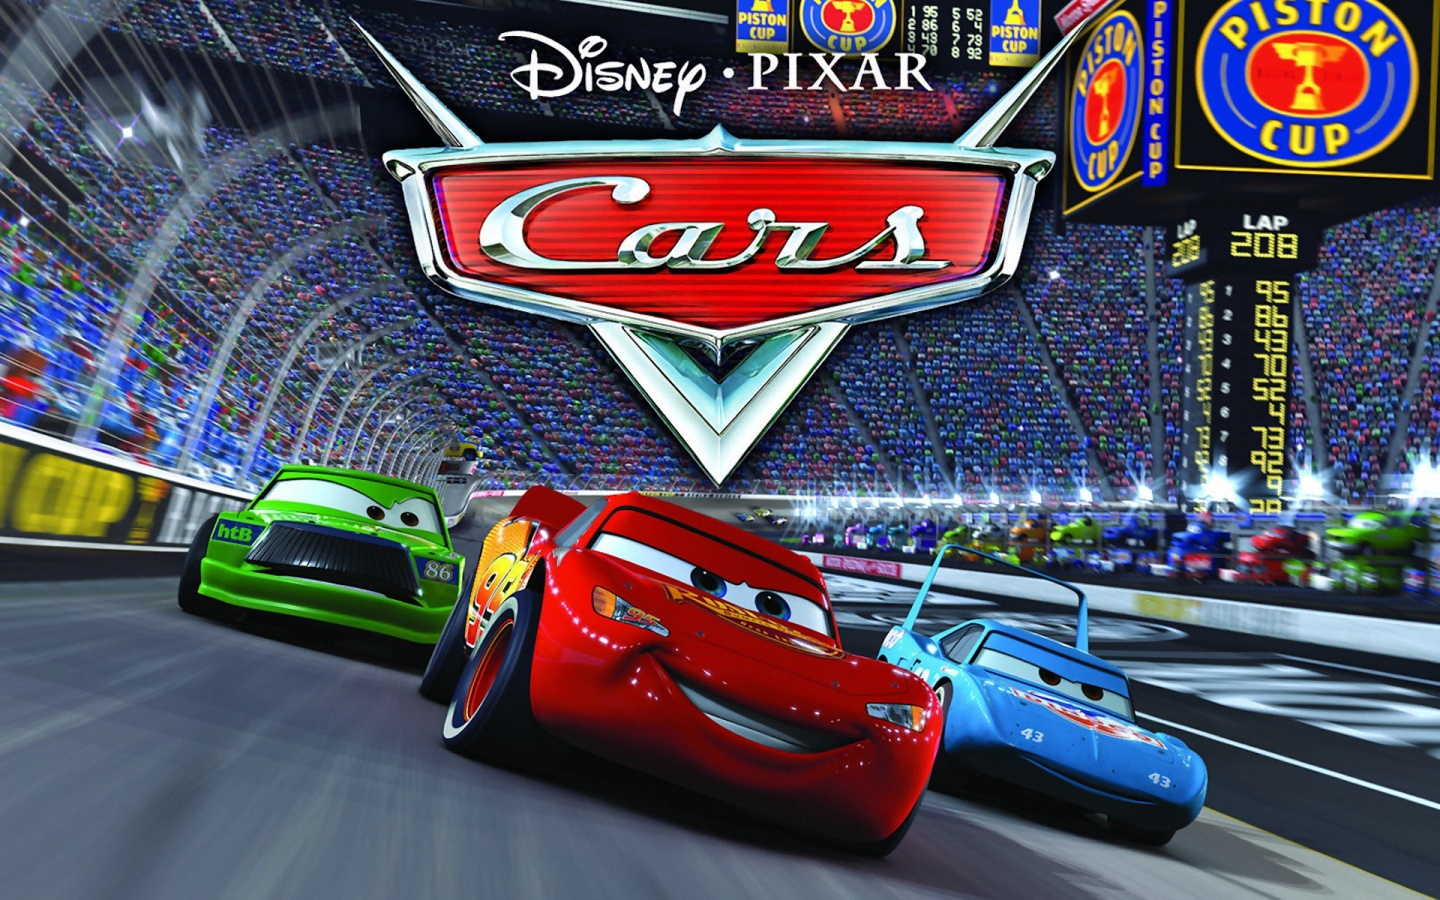 Cars 2 Movie Rating For Kids | Parent Ratings For Cars 2 - ATOE